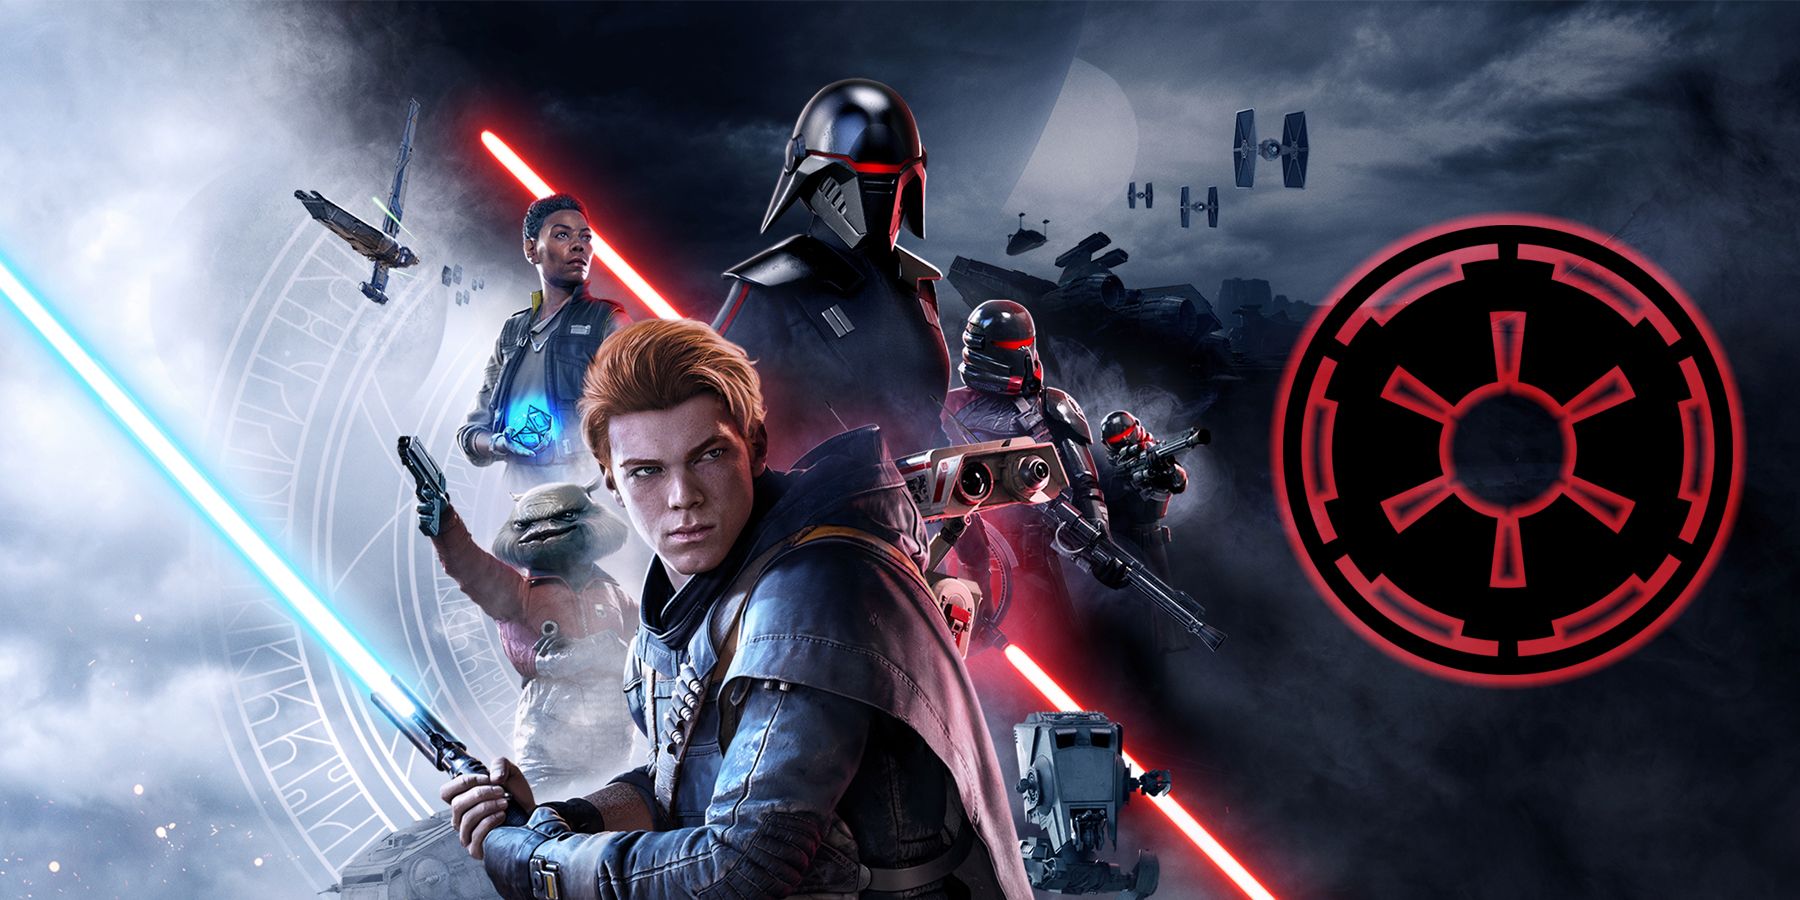 Banner art for Star Wars Jedi: Fallen Order featuring Cal Kestis and the Second Sister with an Empire insignia on the right-hand side.